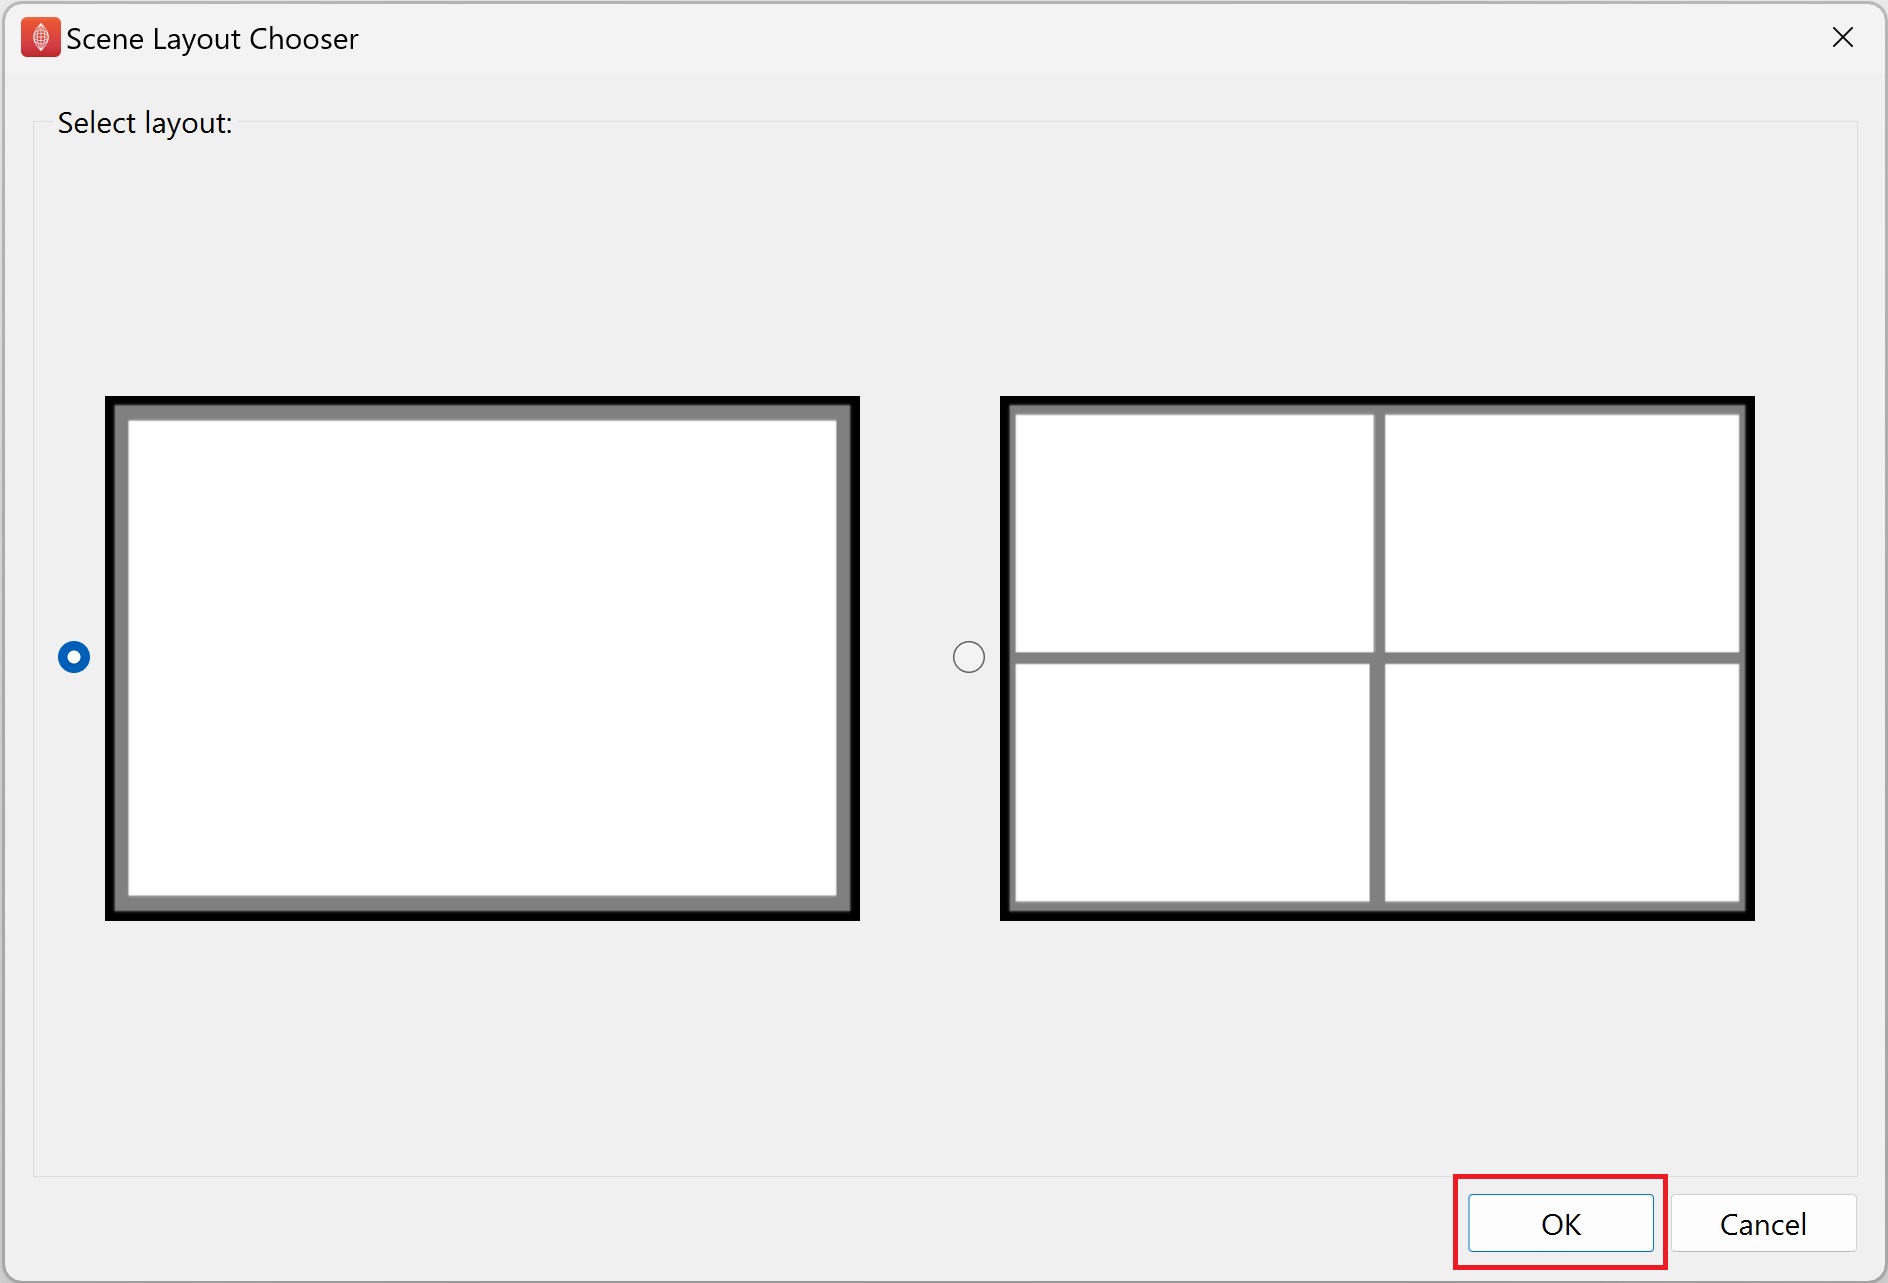 Figure 12: Scene layout chooser dialog with **Ok** button highlighted.